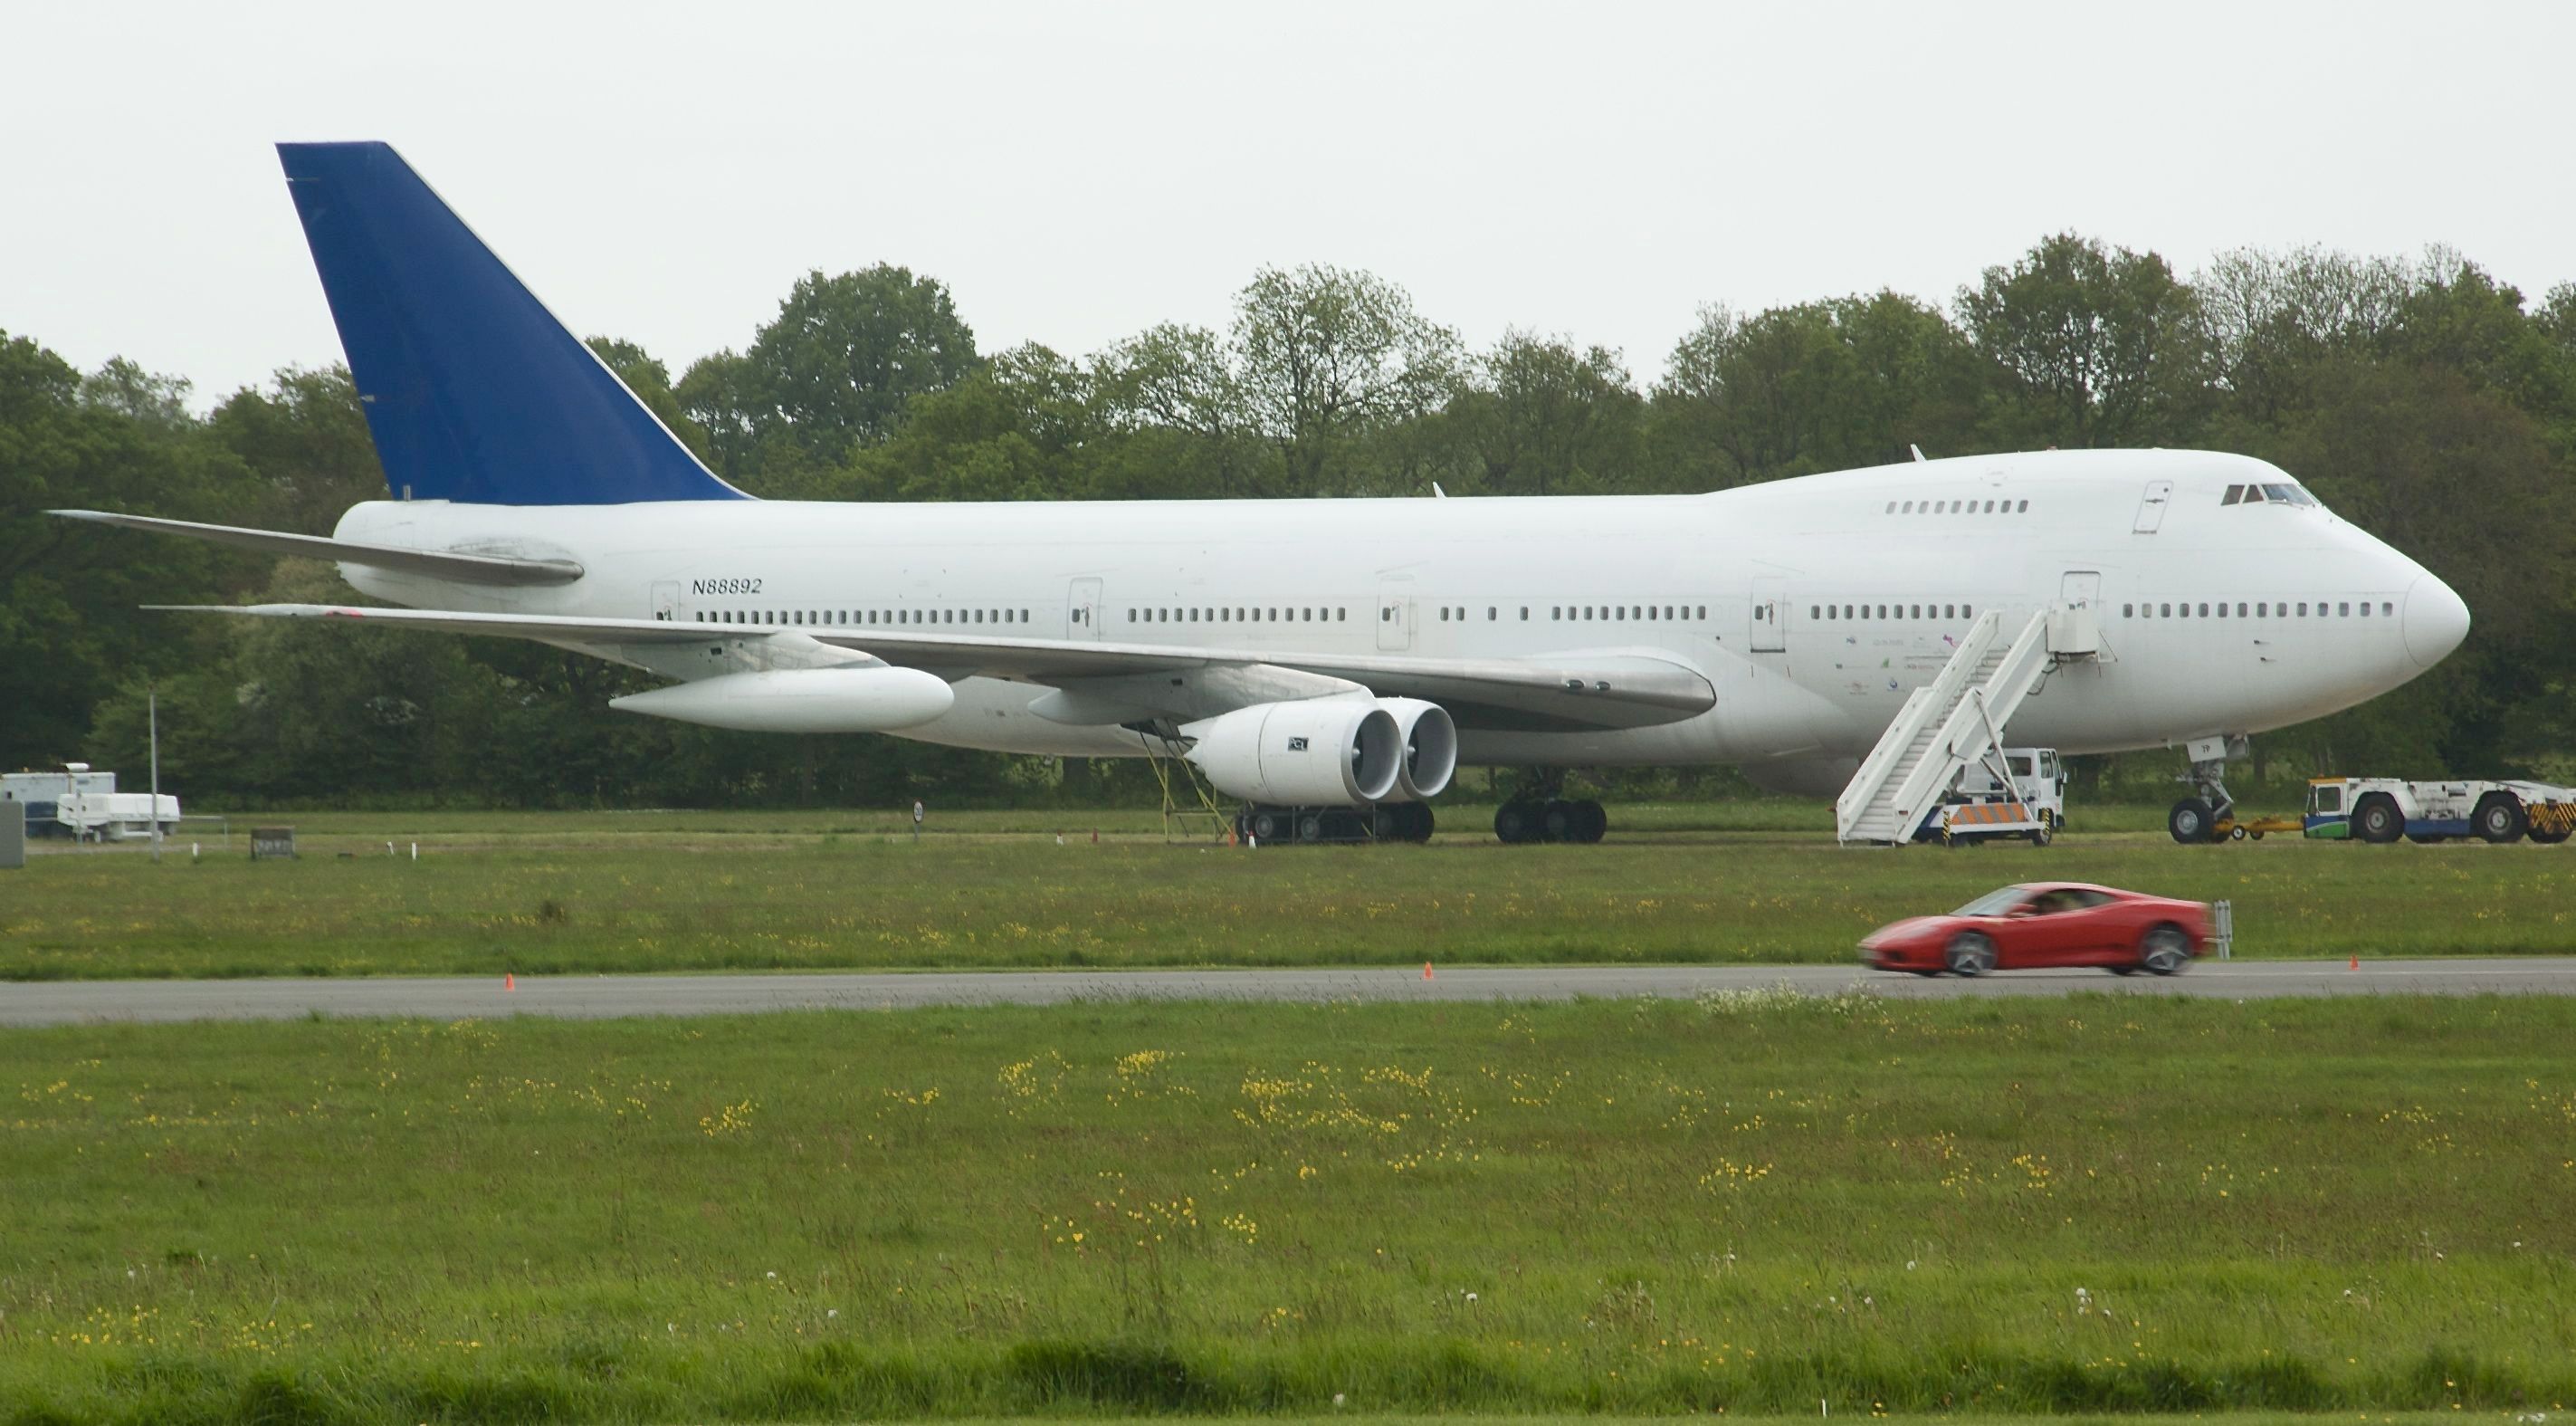 A White Boeing 747 with no livery parked at a small airfield.